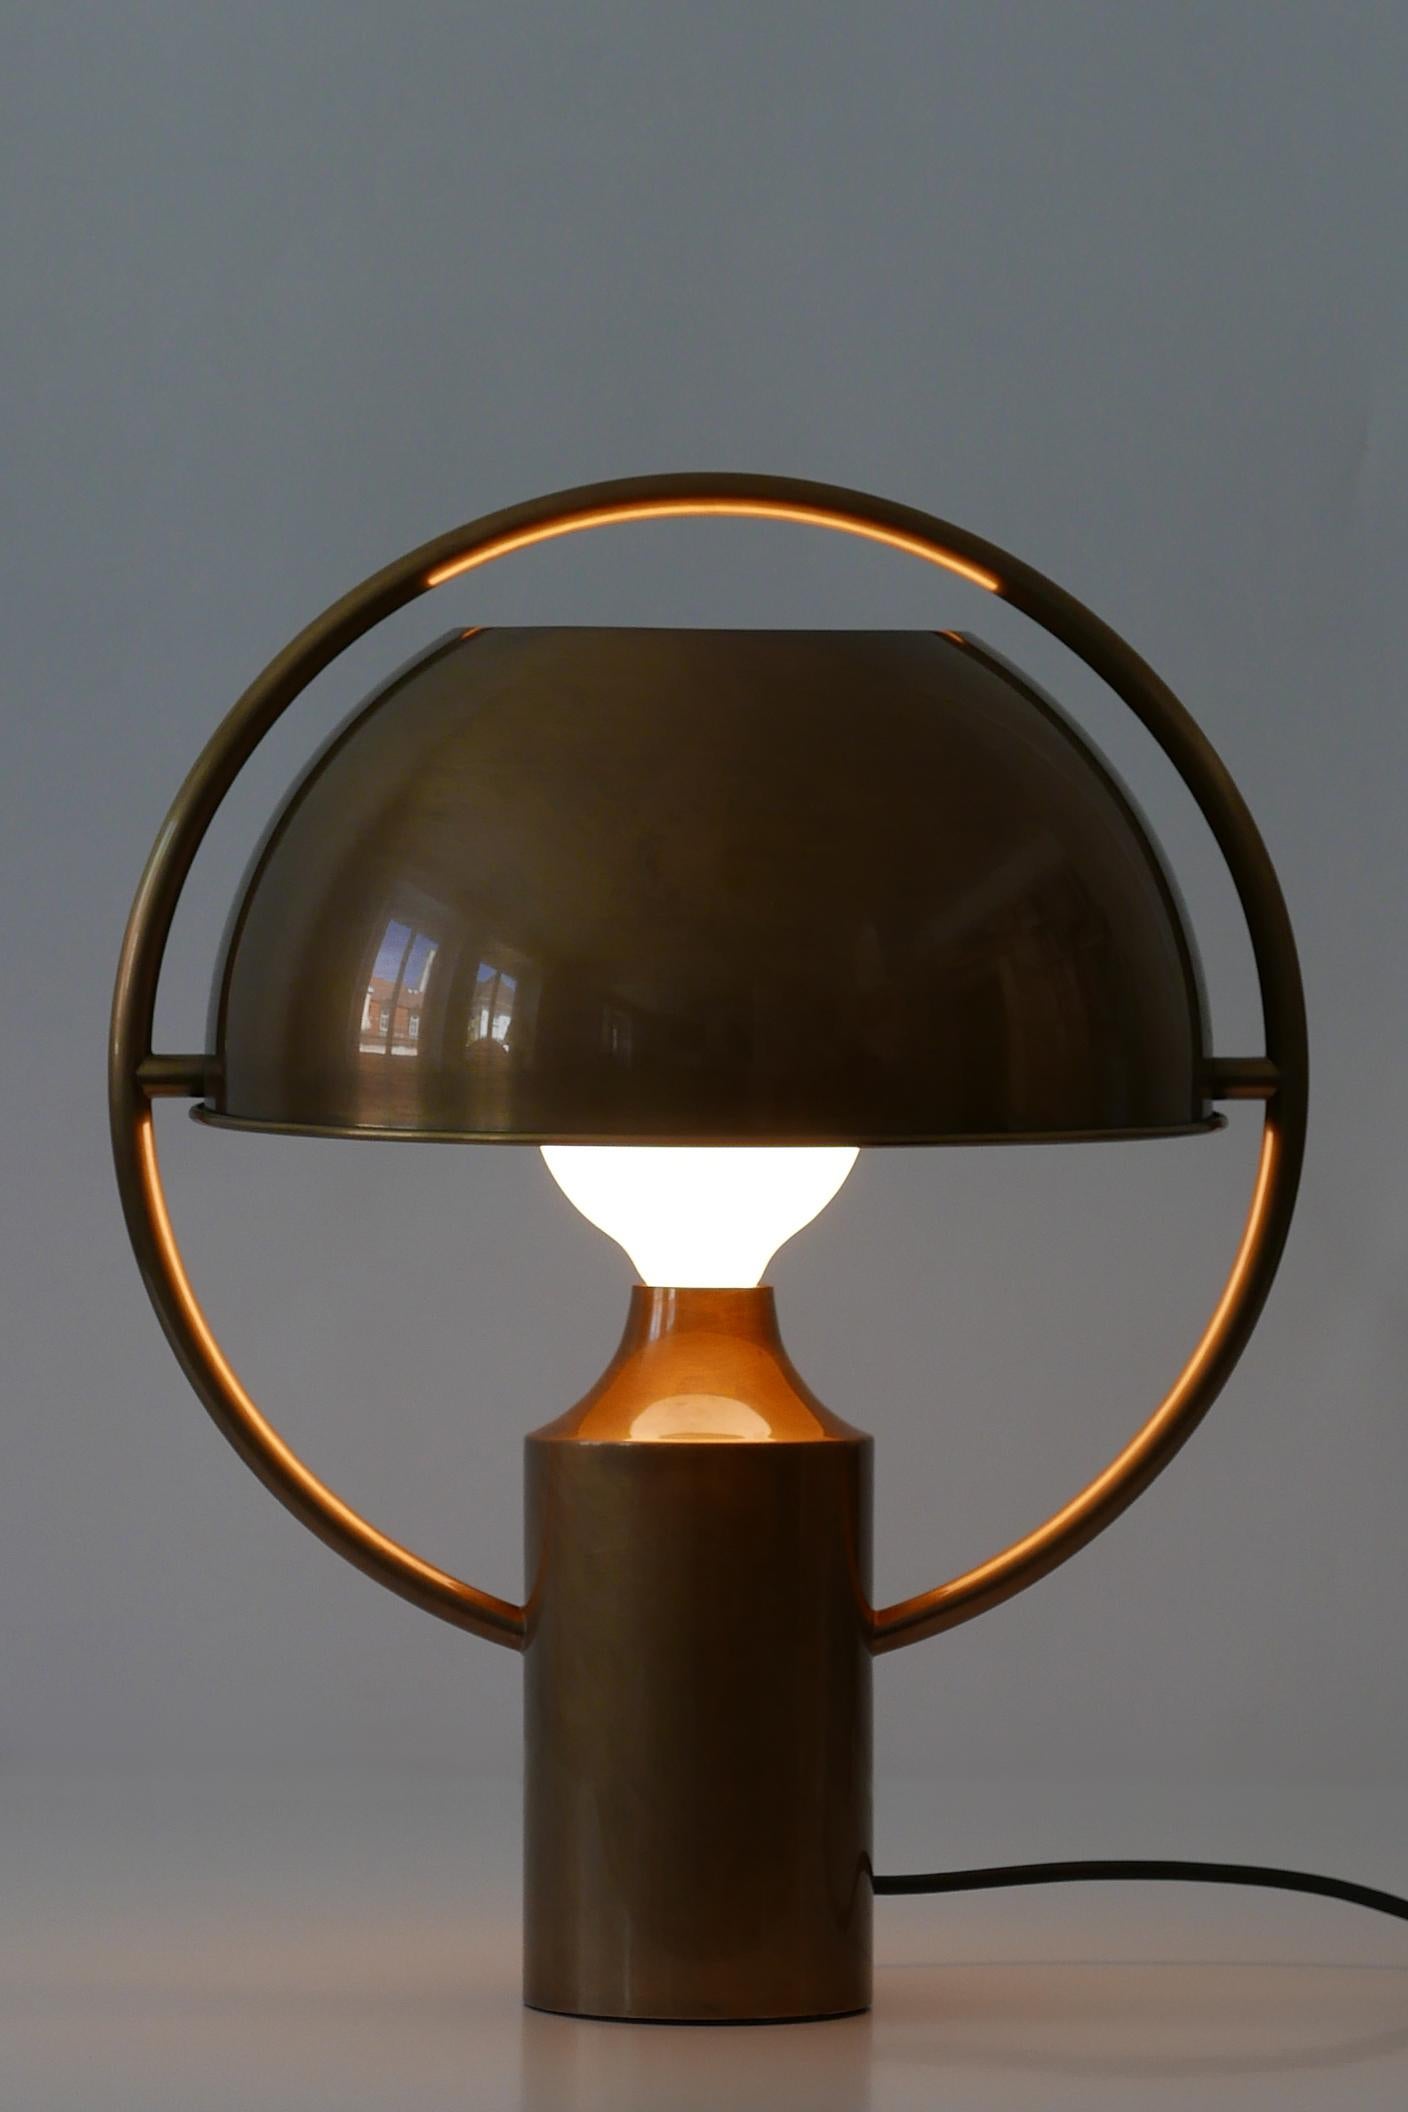 Exceptional, large and elegant Mid-Century Modern brass table lamp with rotating lamp shade. Designed by Günter Schulz for Florian Schulz, 1970s, Germany. An employee of Florian Schulz confirmed that this piece was designed by Günter Schulz, father